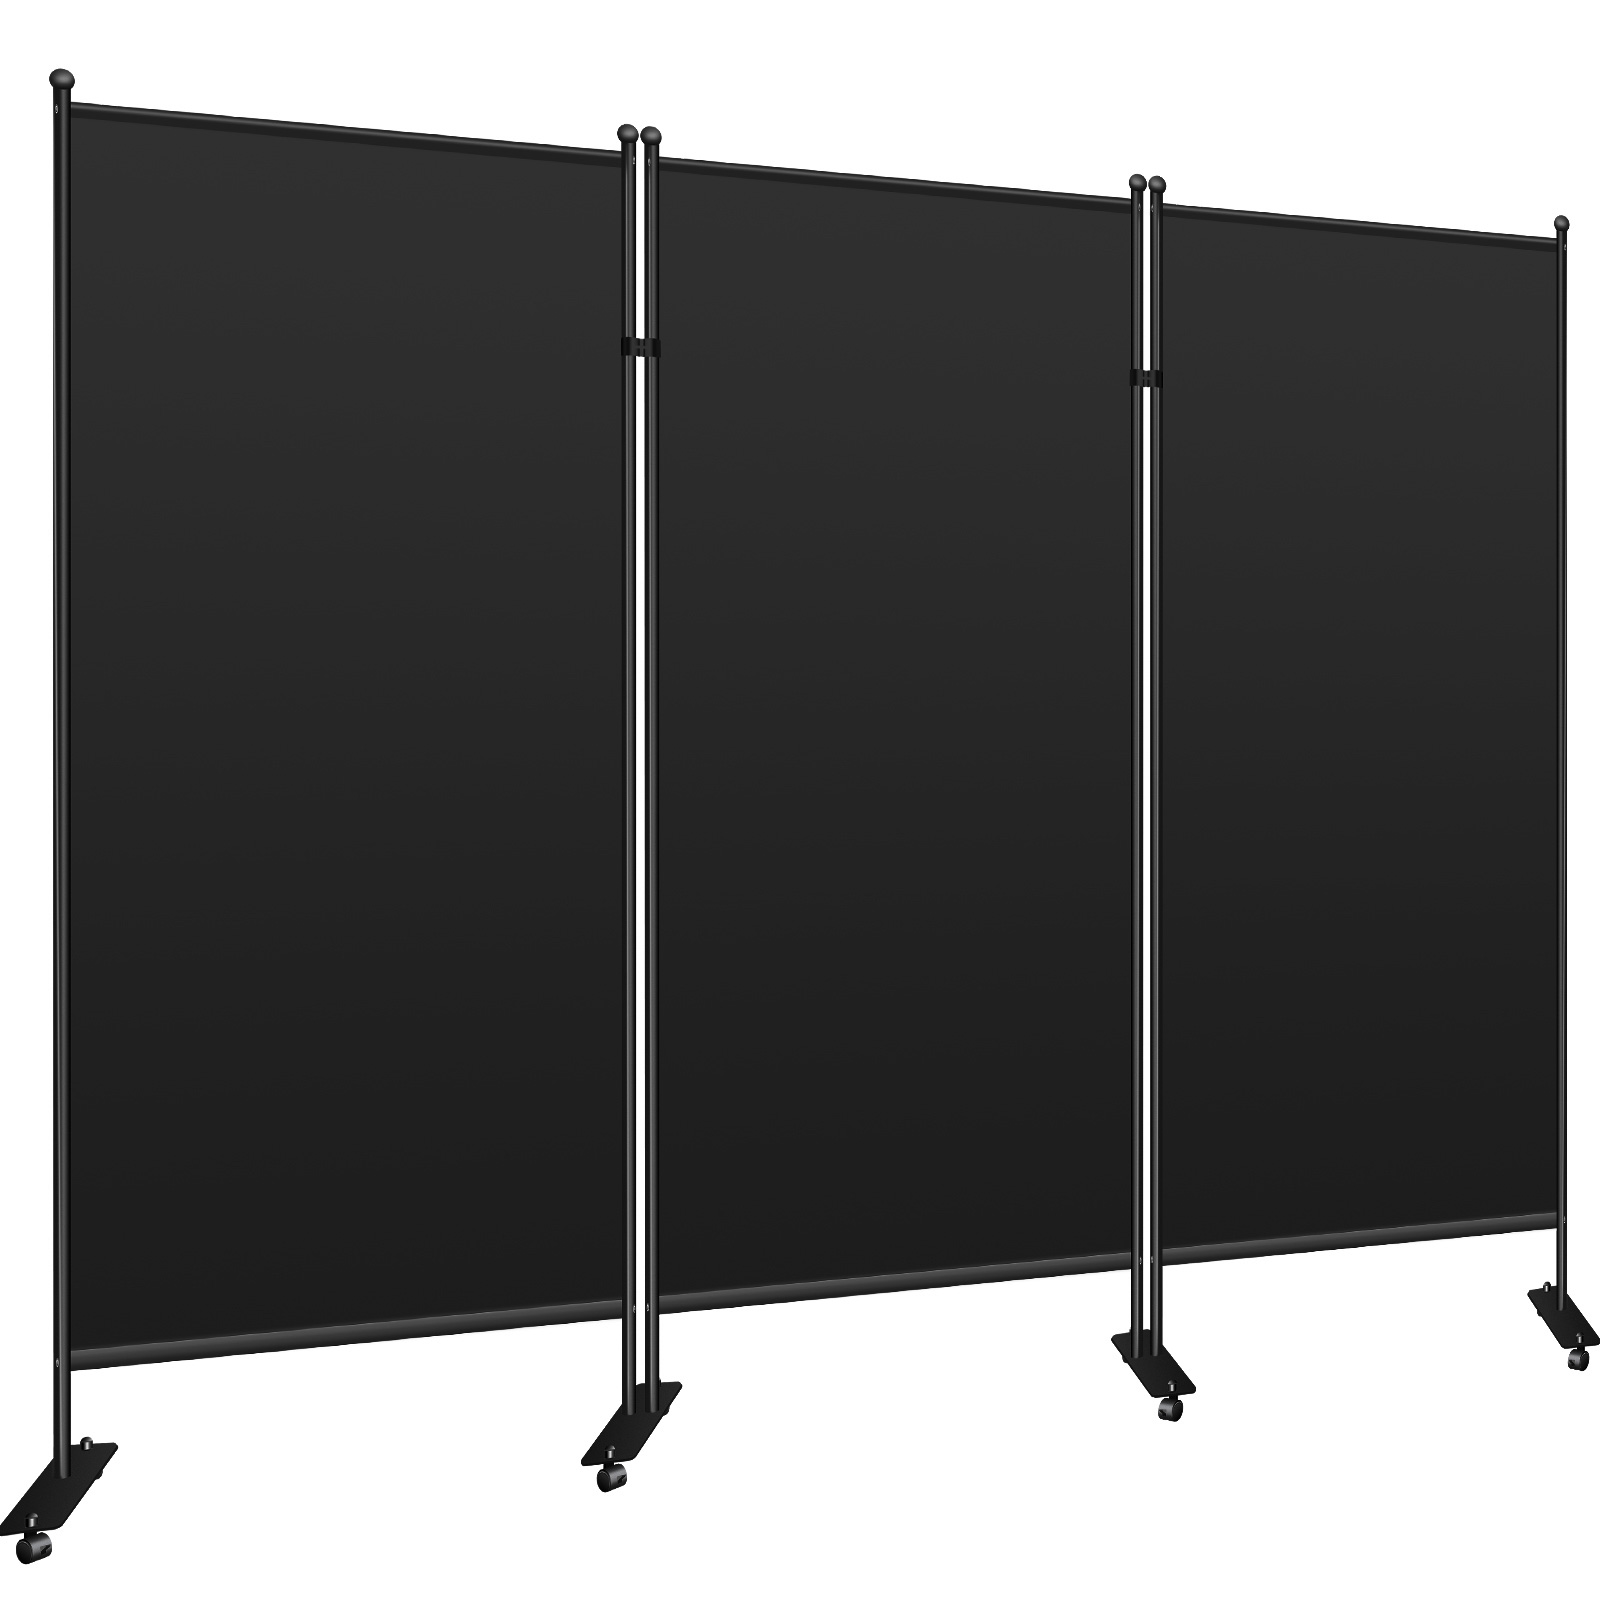 Private Screen divider,Room partition,Room divider,Office/Bar/Hotel decoration10 